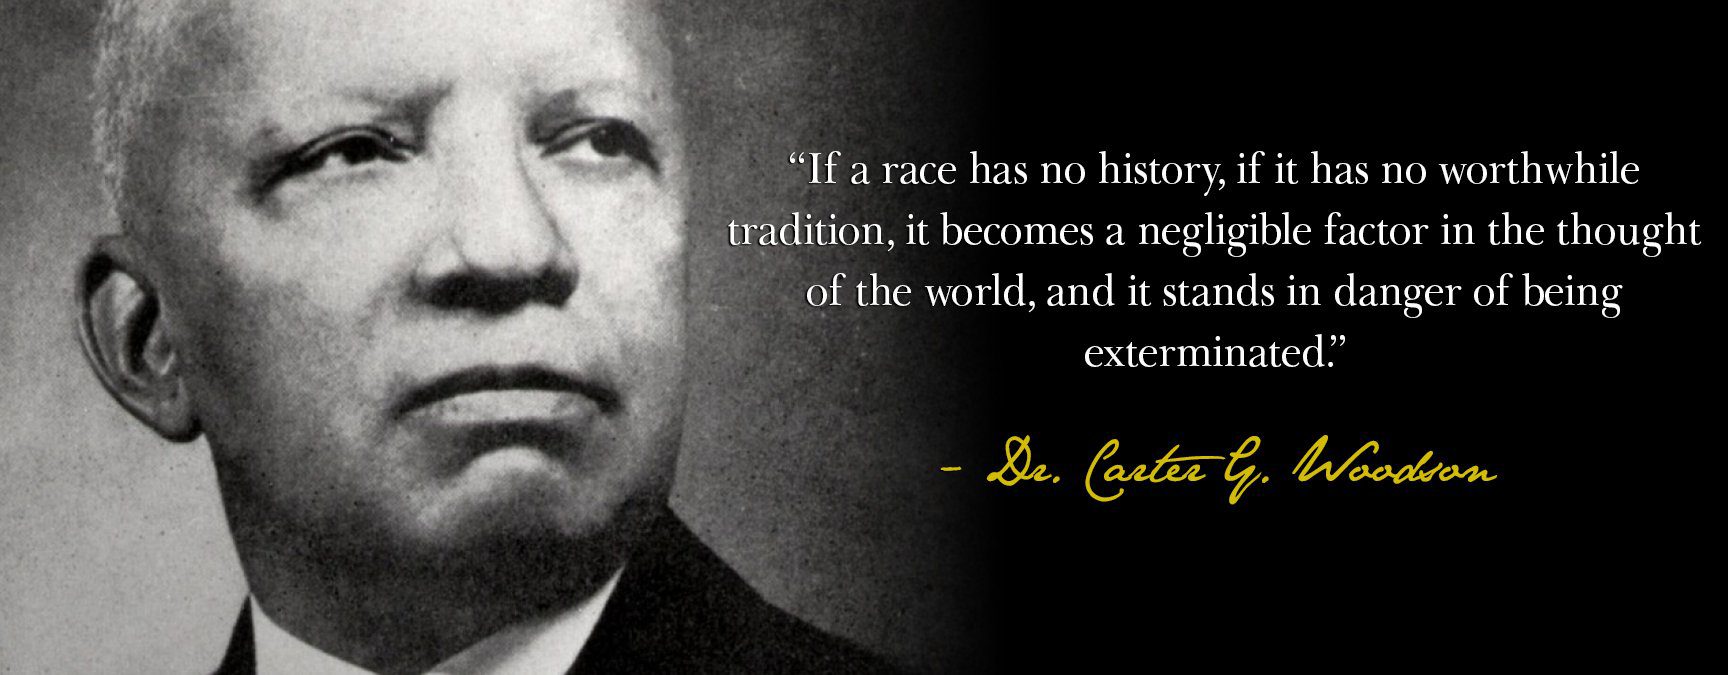 A quote from the man that started Black History month. Mr. Carter Woodson